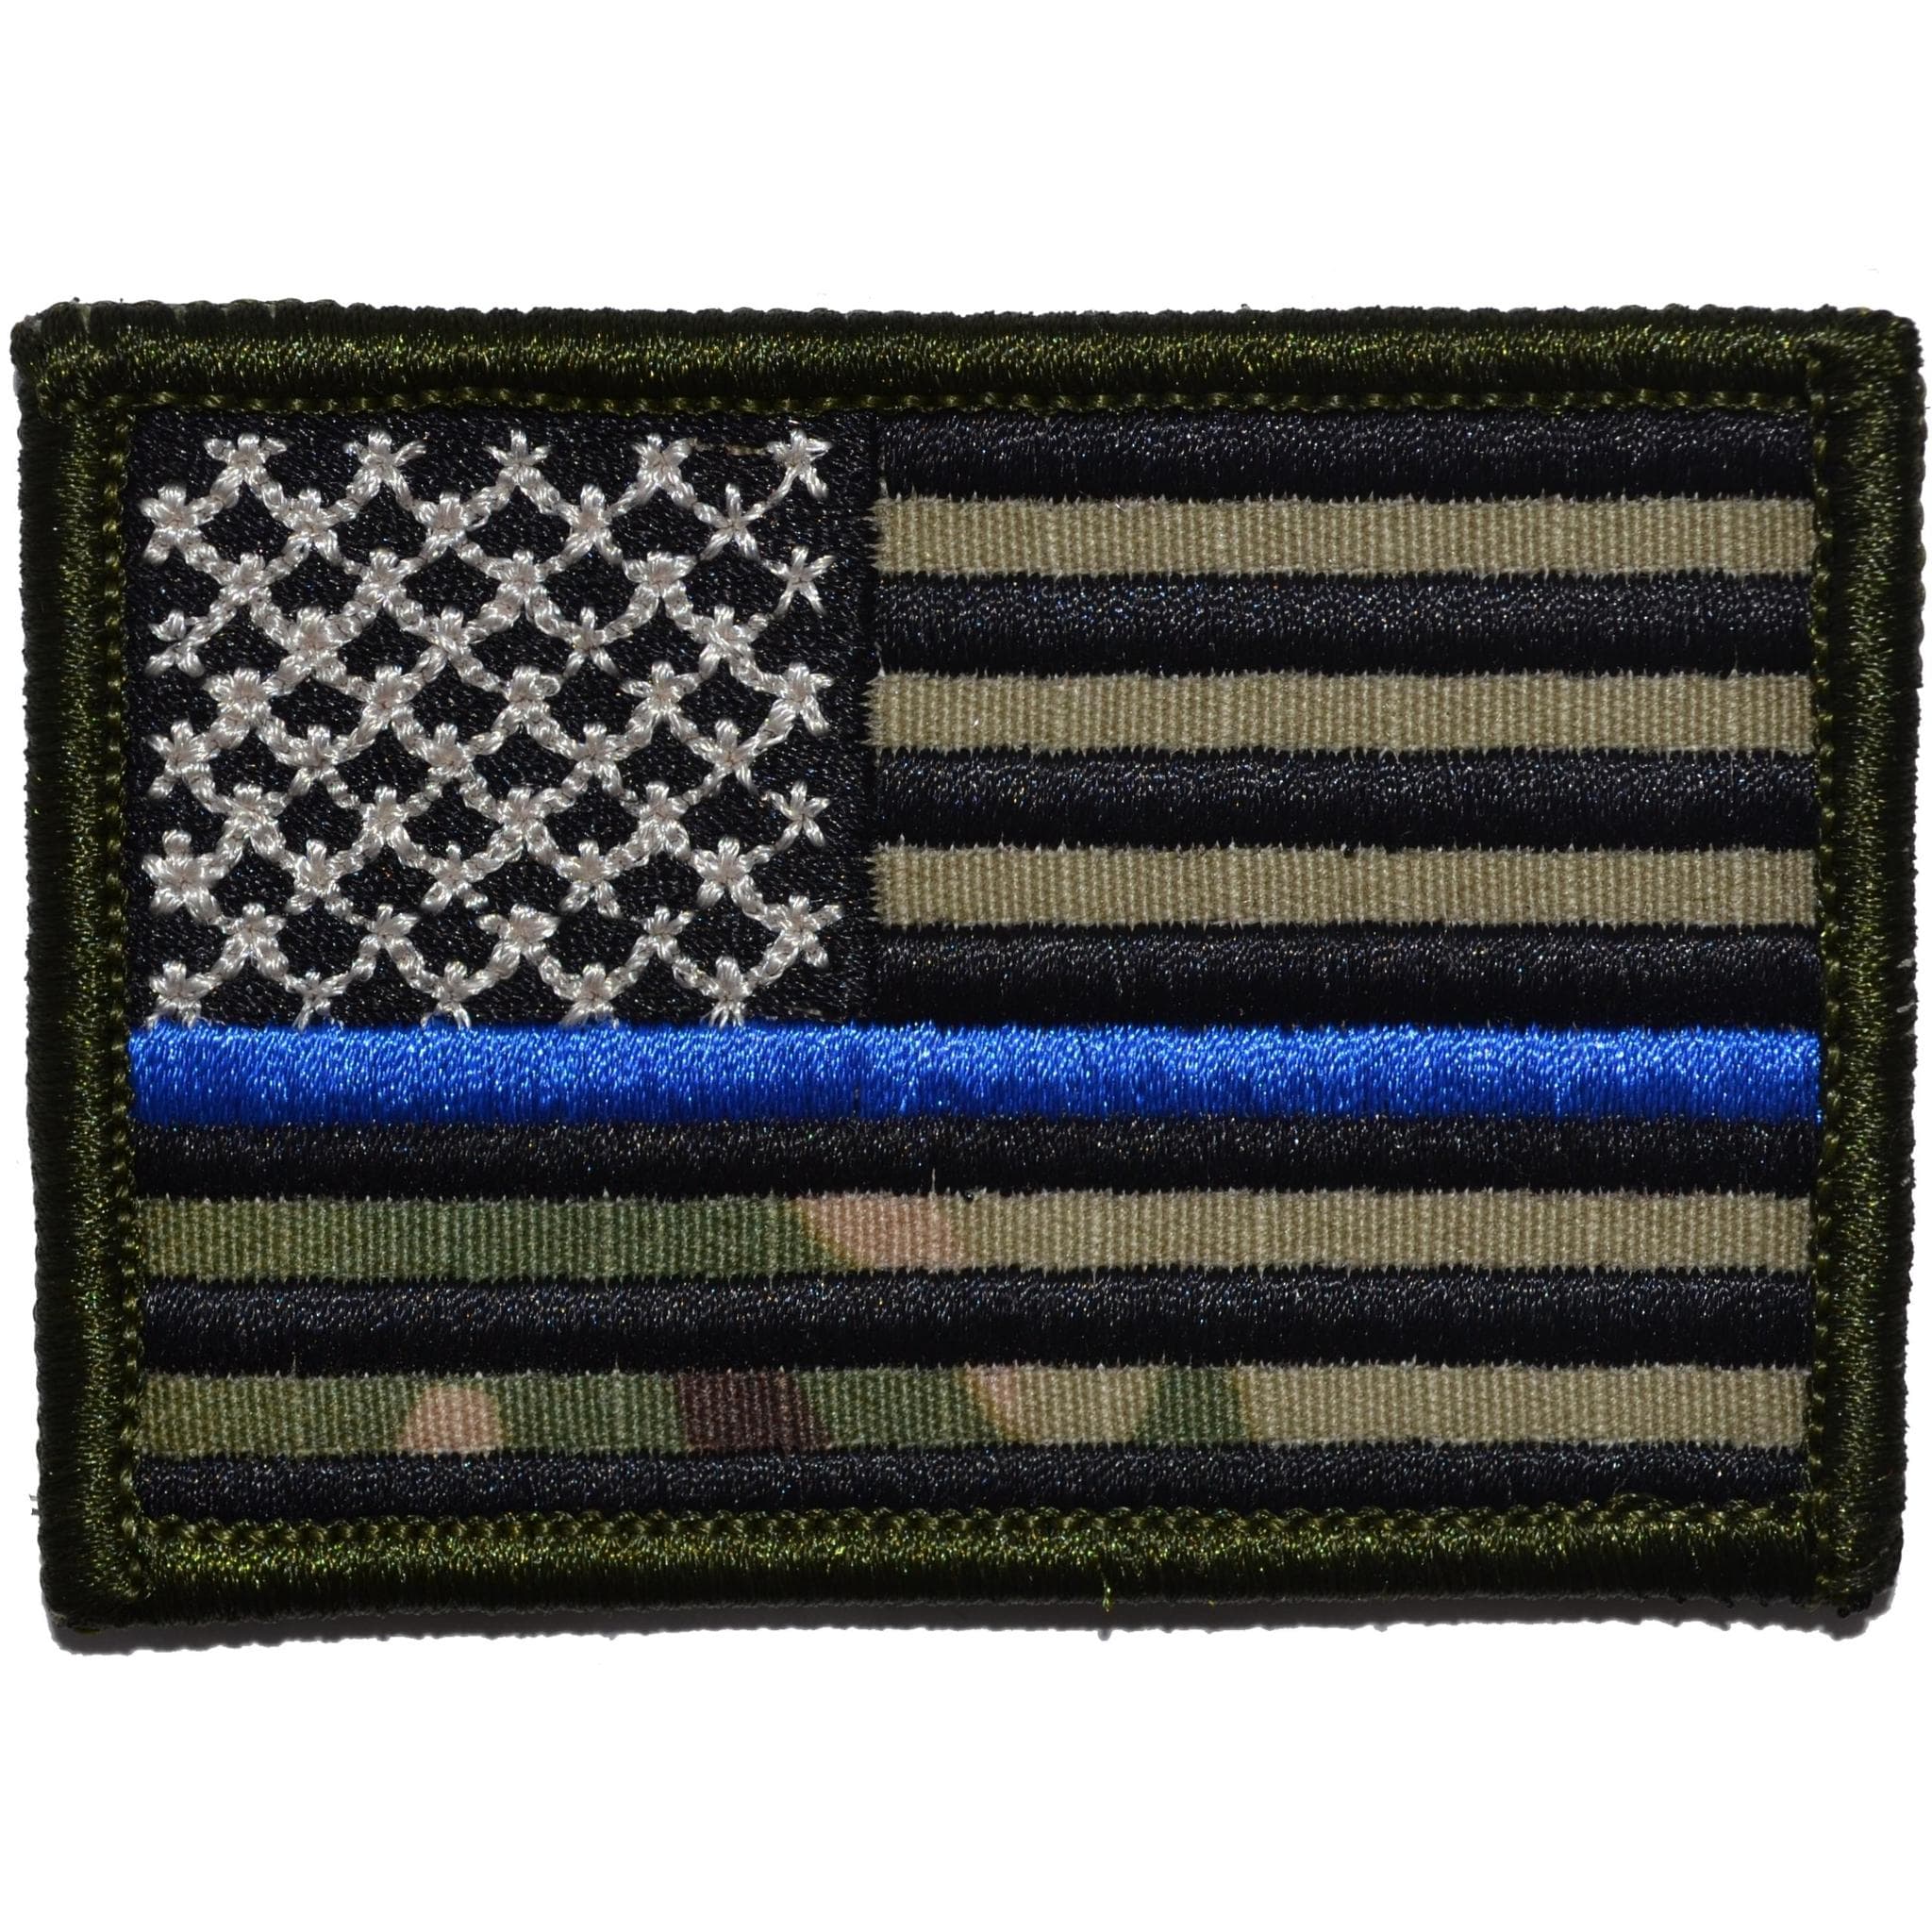 Tactical Gear Junkie Patches MultiCam Thin Blue Line Police USA Flag - 2x3 Patch